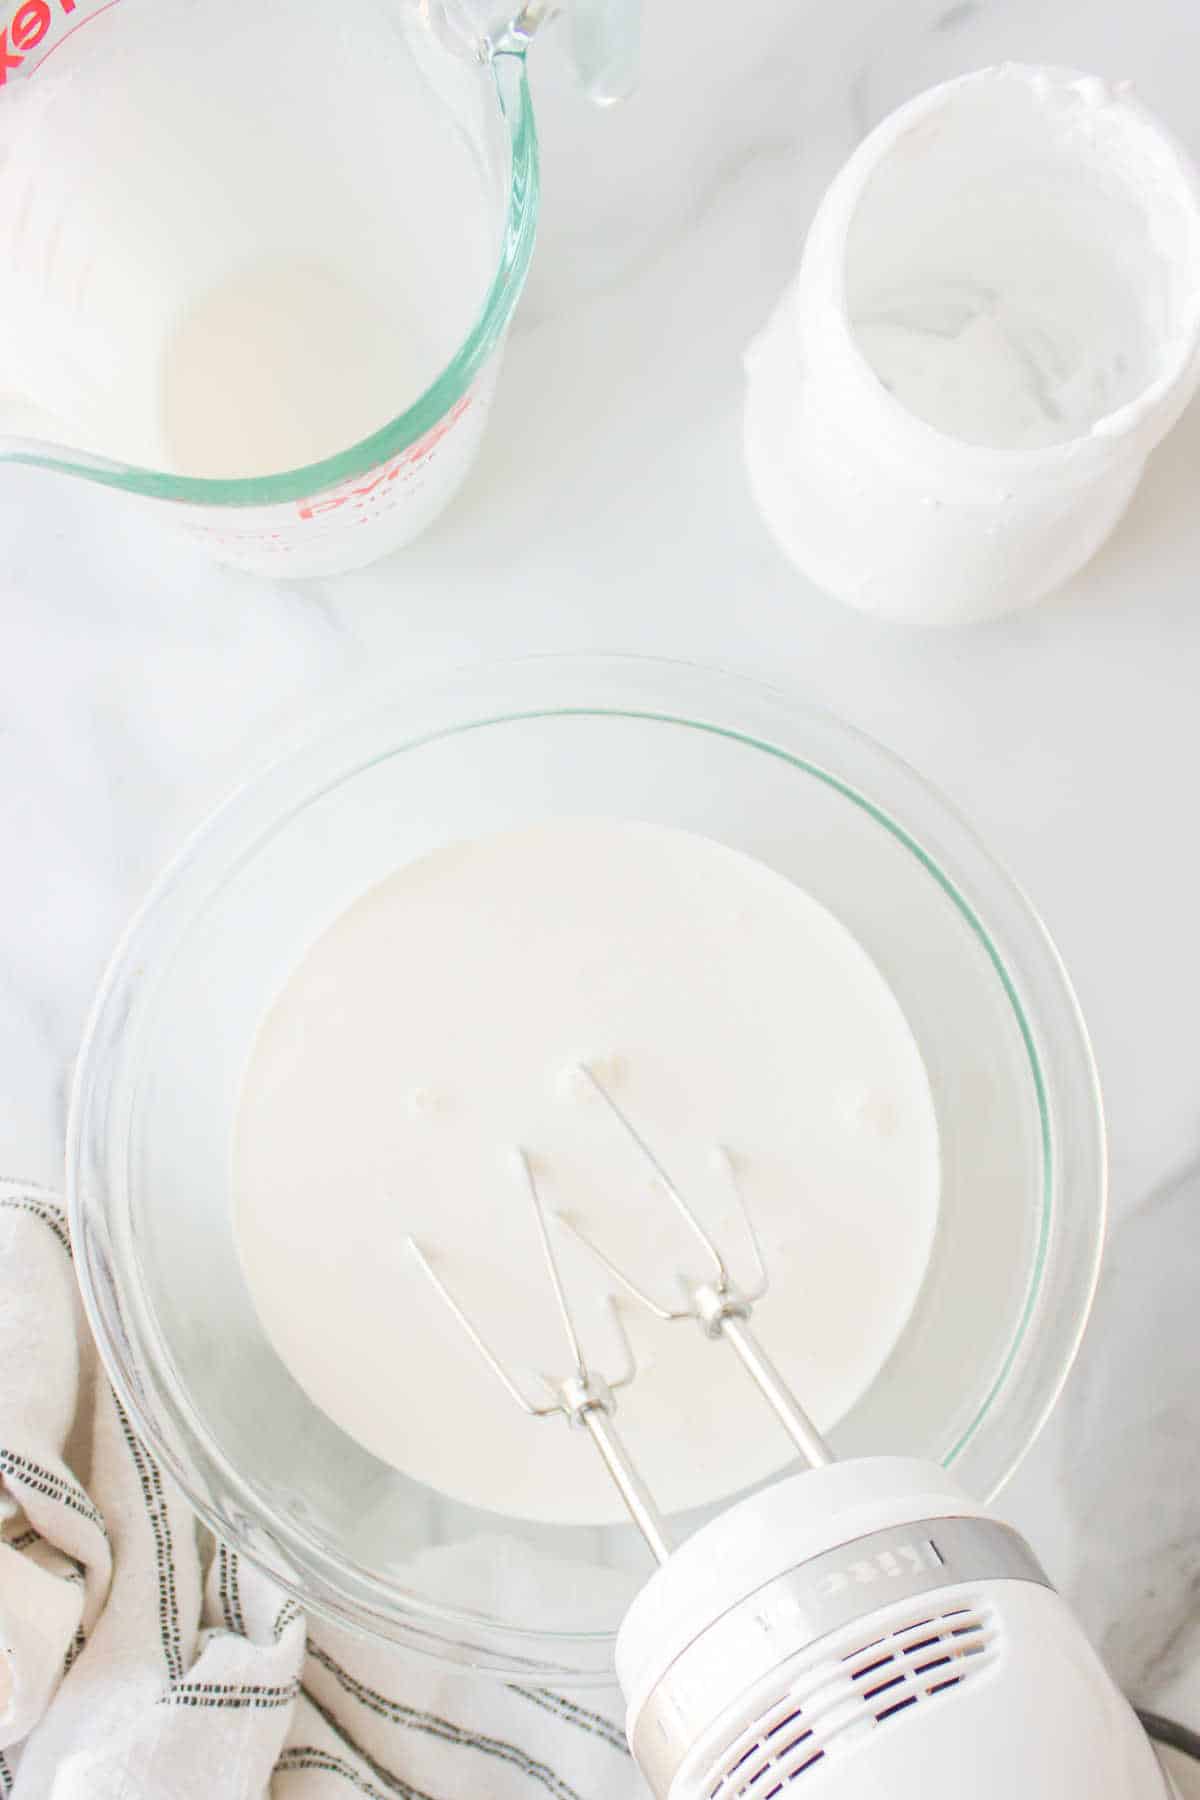 Electric hand mixer beating a bowl of whipped cream.